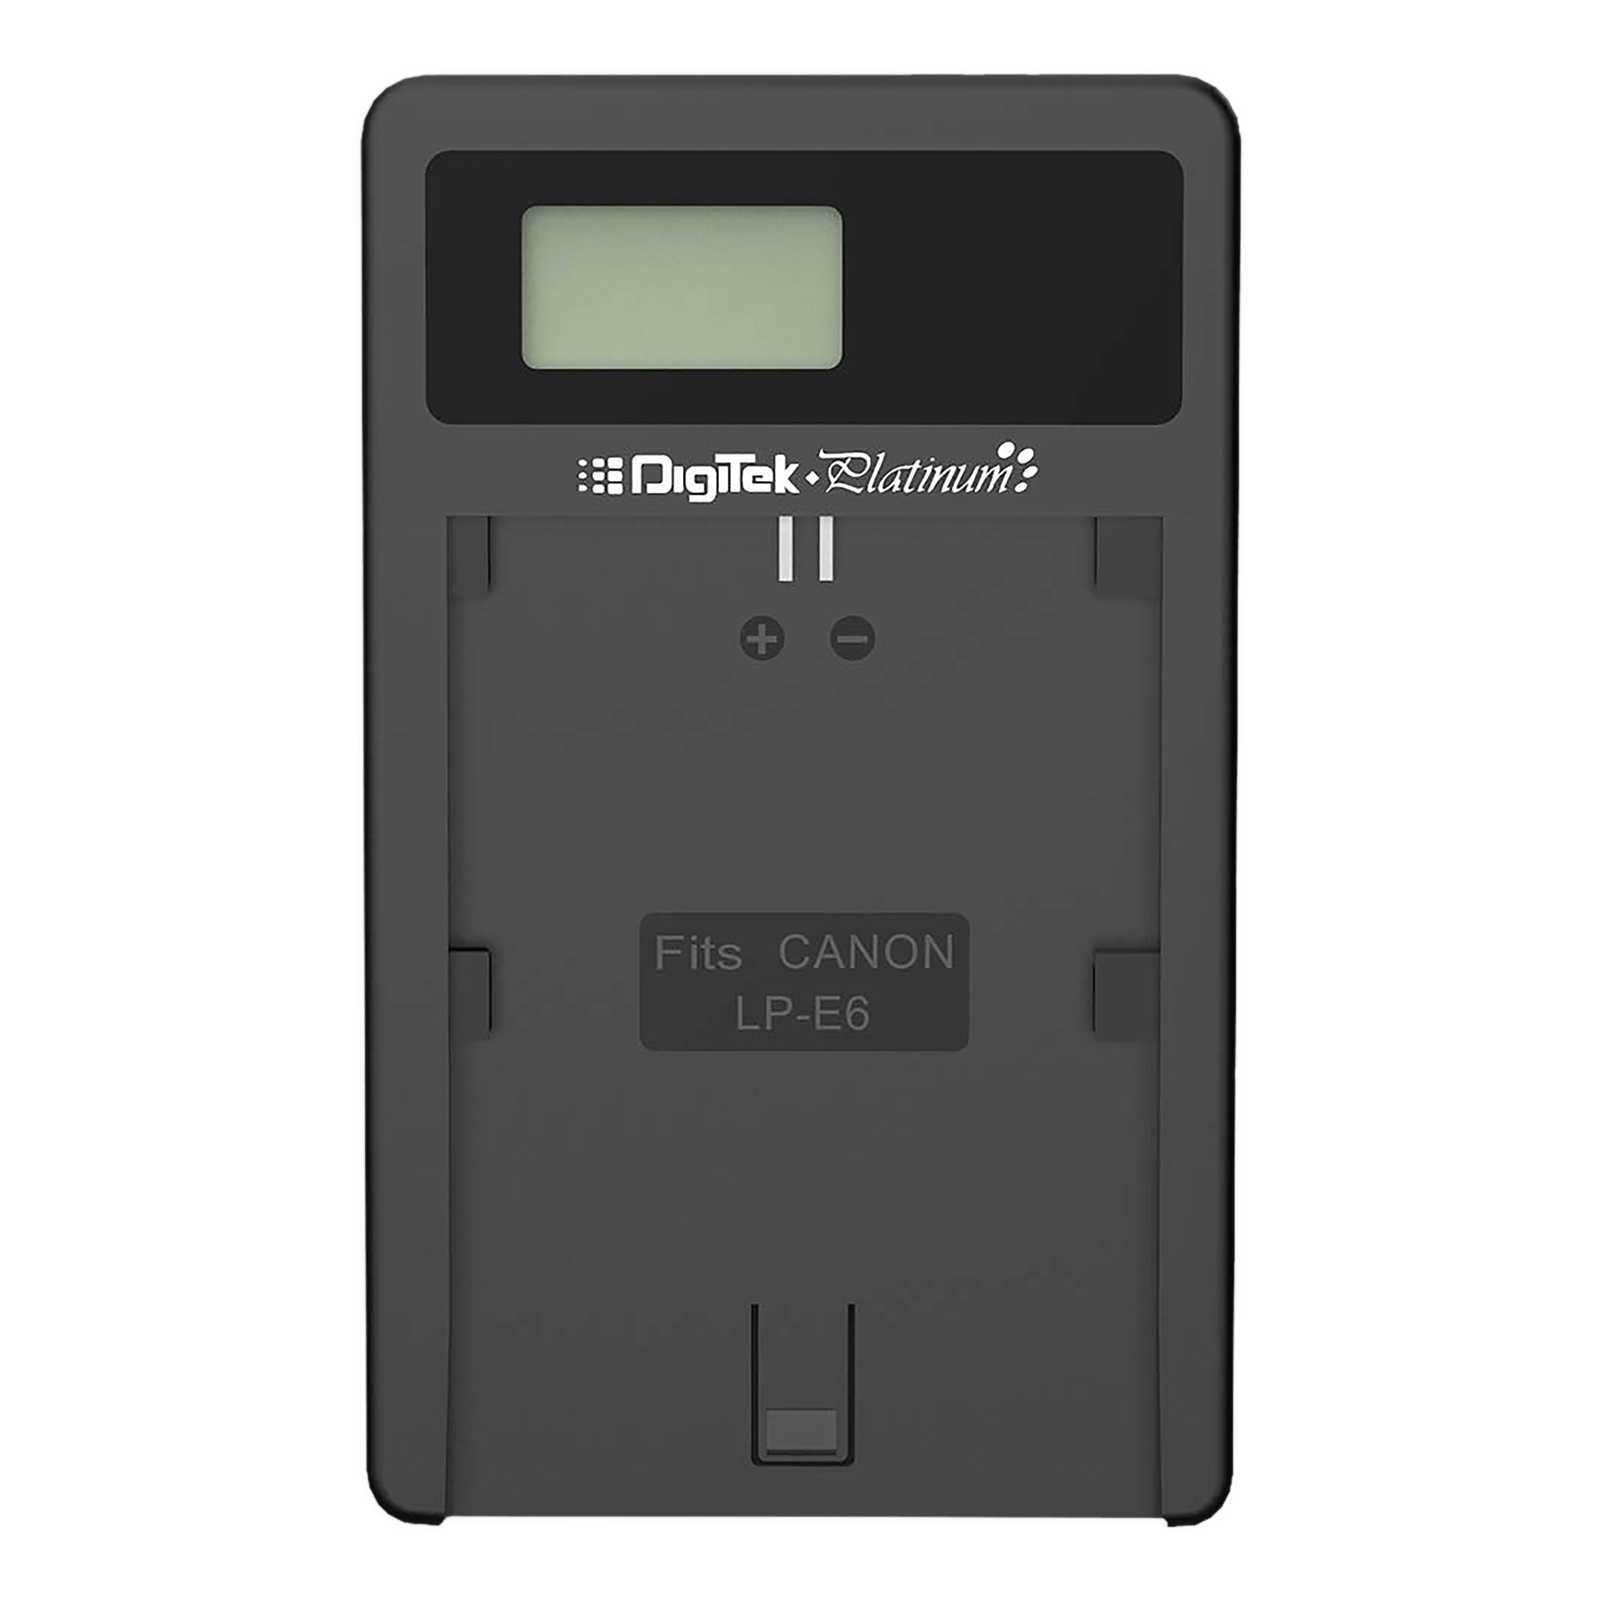 DigiTek Platinum DPUC 012S (LCD MU) Quick Camera Battery Charger for LP-E6 (Over Voltage Protection)_1